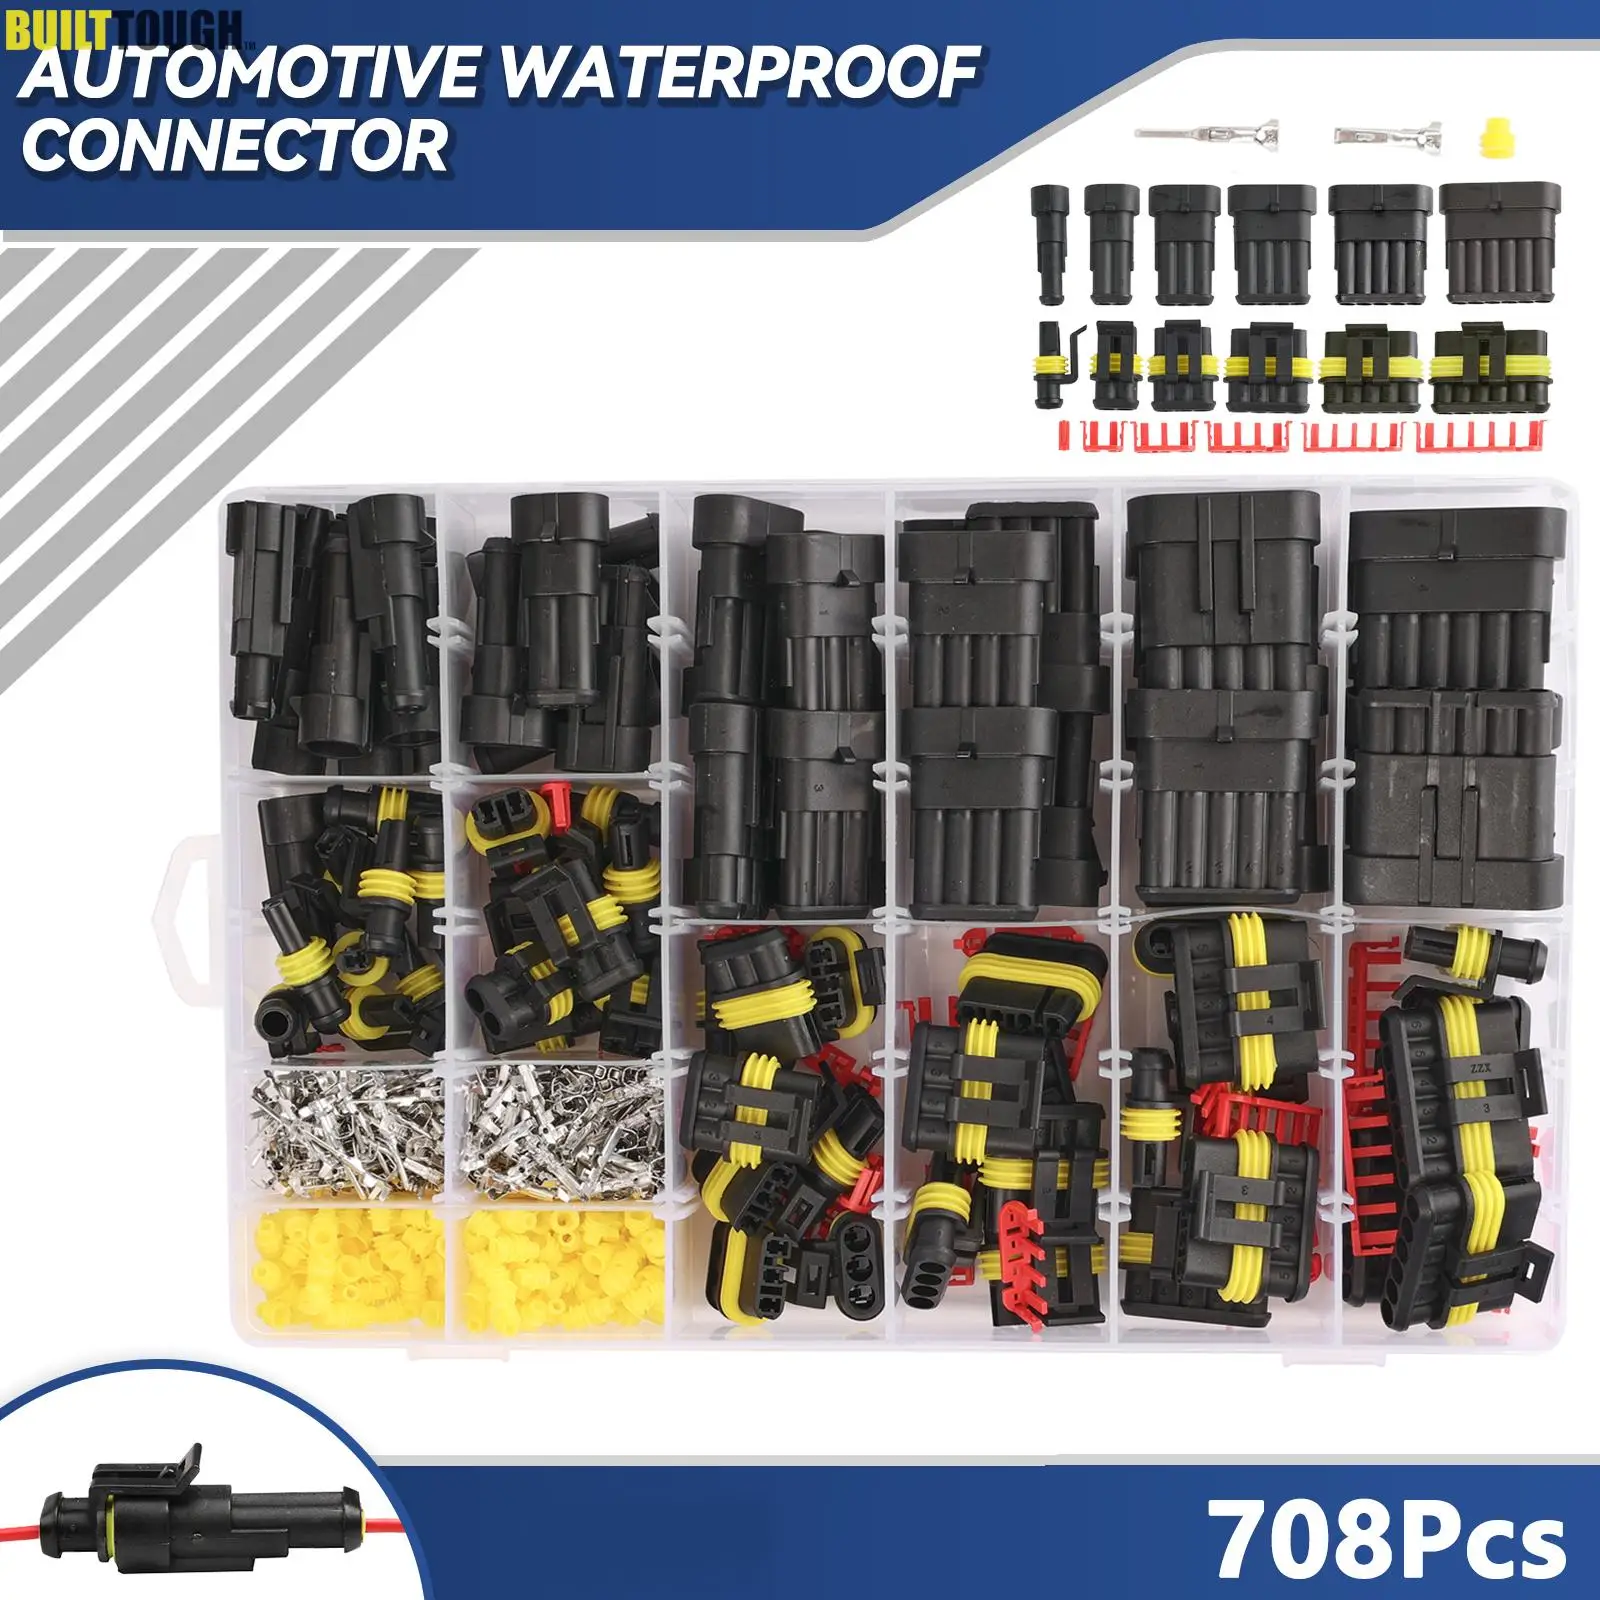 

708pcs HID Waterproof Connectors 1/2/3/4 Pin 26 Sets Car Electrical Wire Connector Plug Truck Harness 300V 12A Set 352 Pack Kit